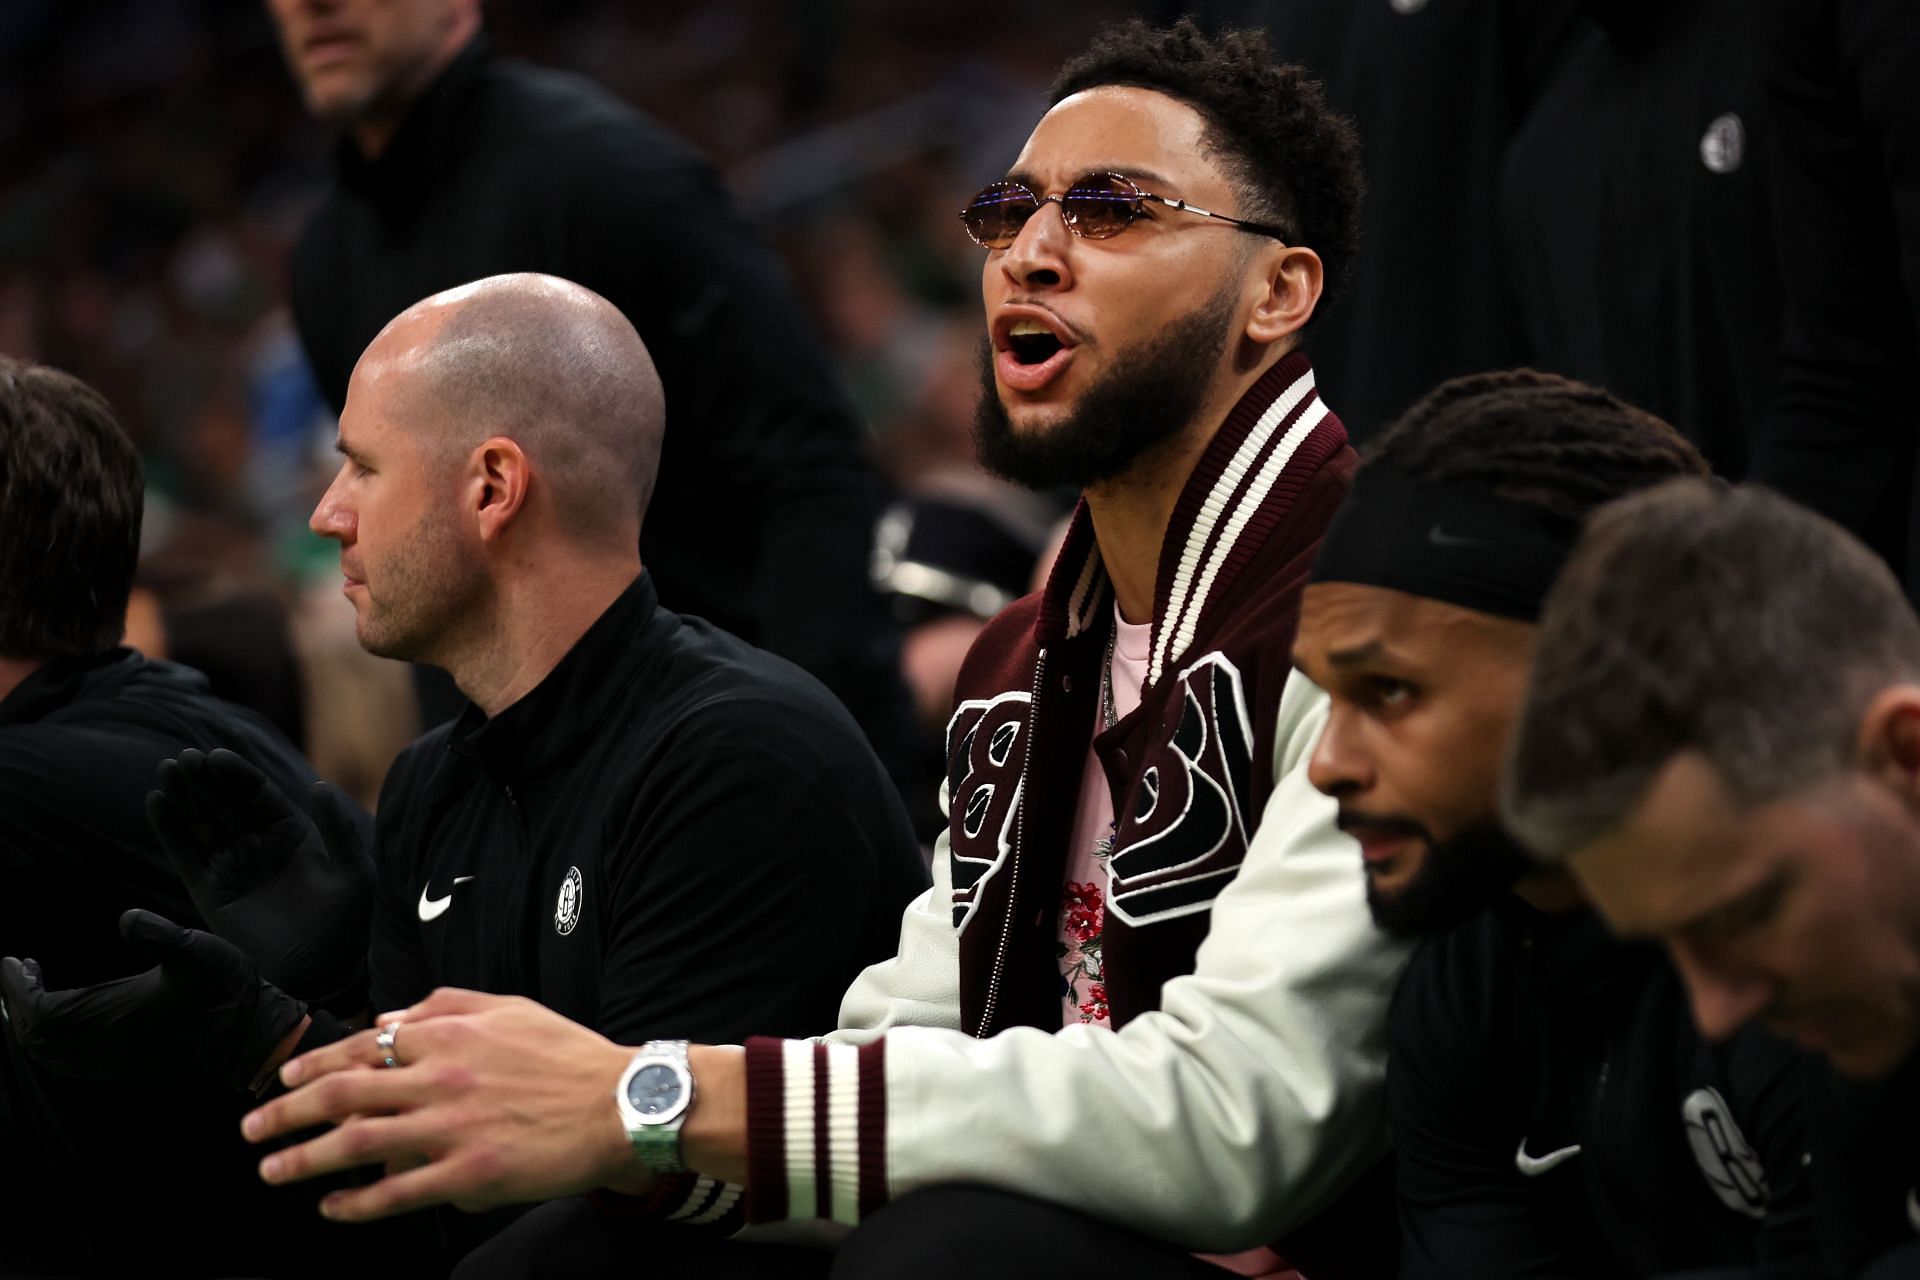 Stephen A. Smith blasts Ben Simmons after the Brooklyn Nets ruled him out for Game 4 against the Boston Celtics.